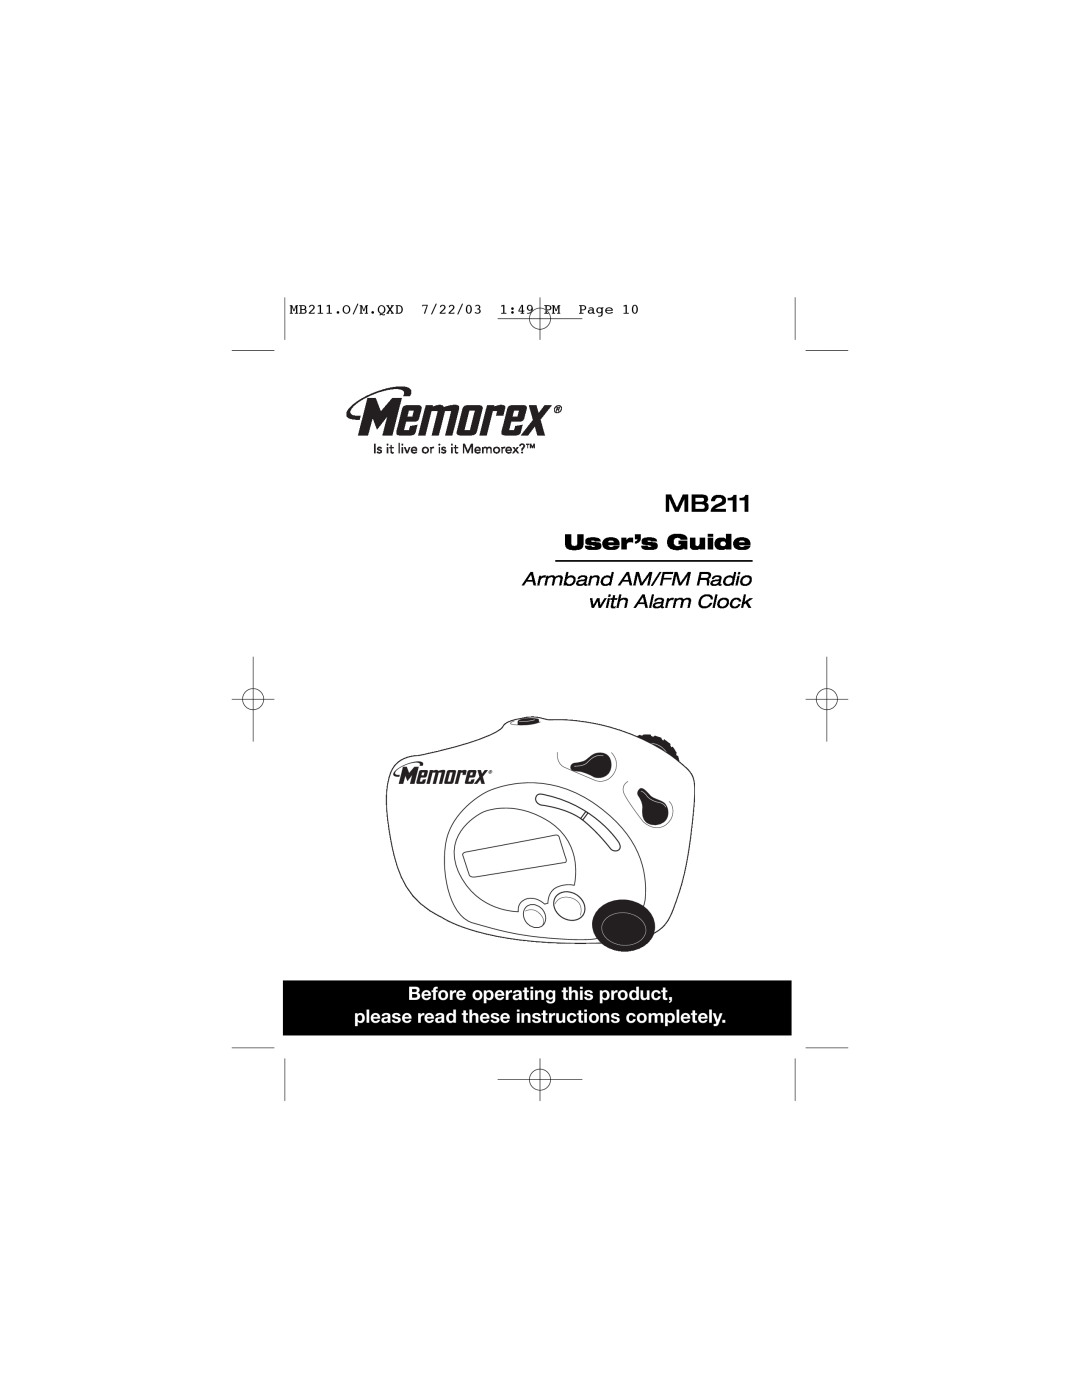 Memorex MB211 manual Before operating this product, please read these instructions completely, User’s Guide 